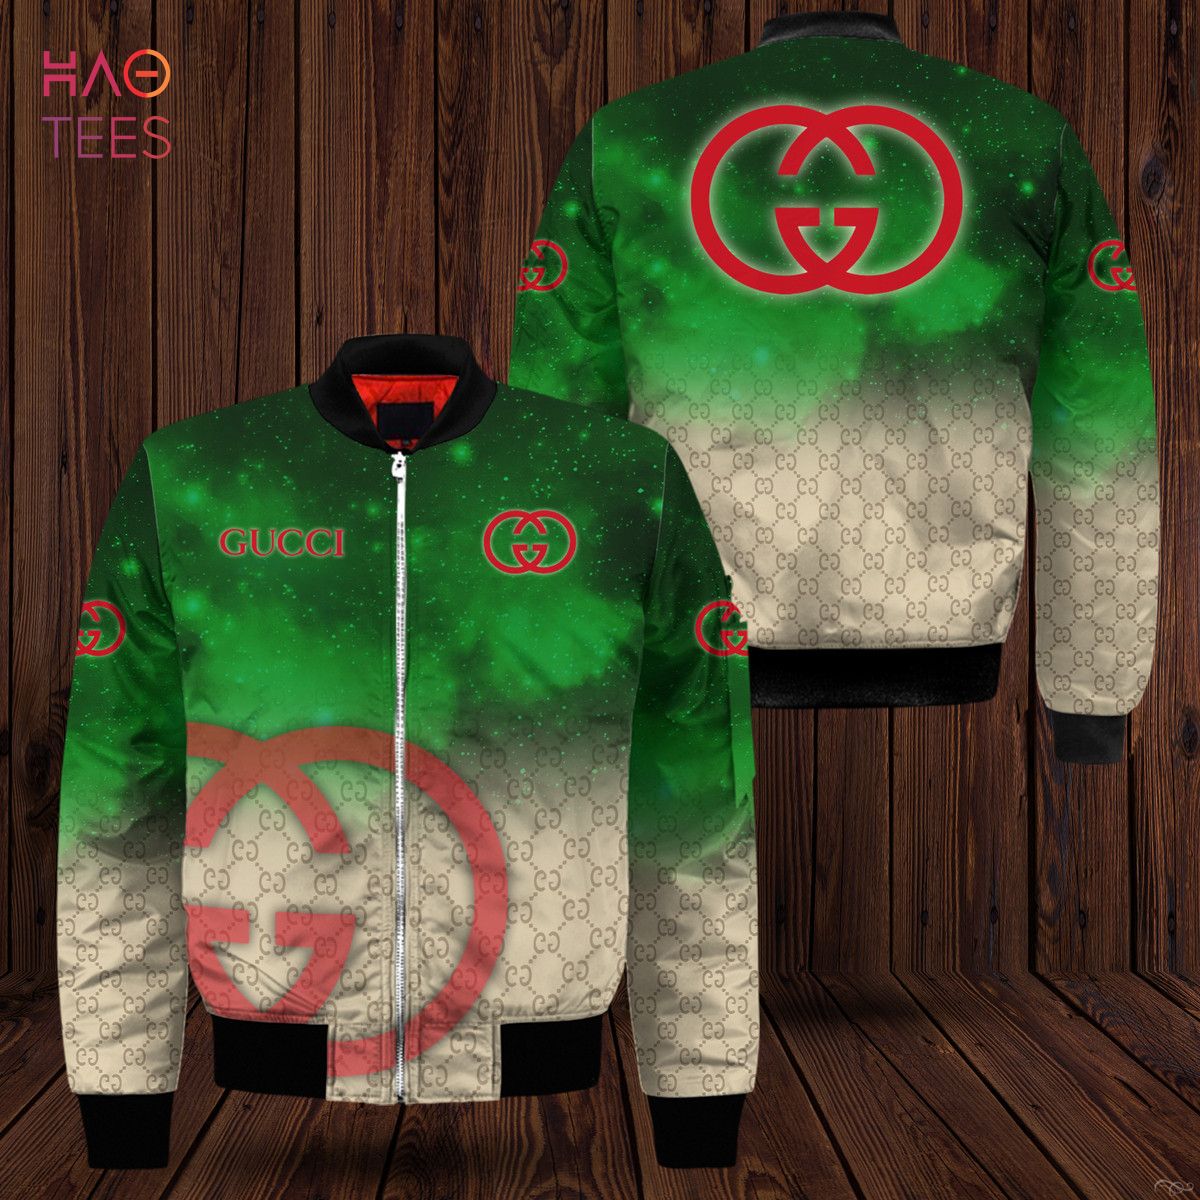 HOT Gucci Luxury Brand Green Mix Color Bomber Jacket Limited Edition